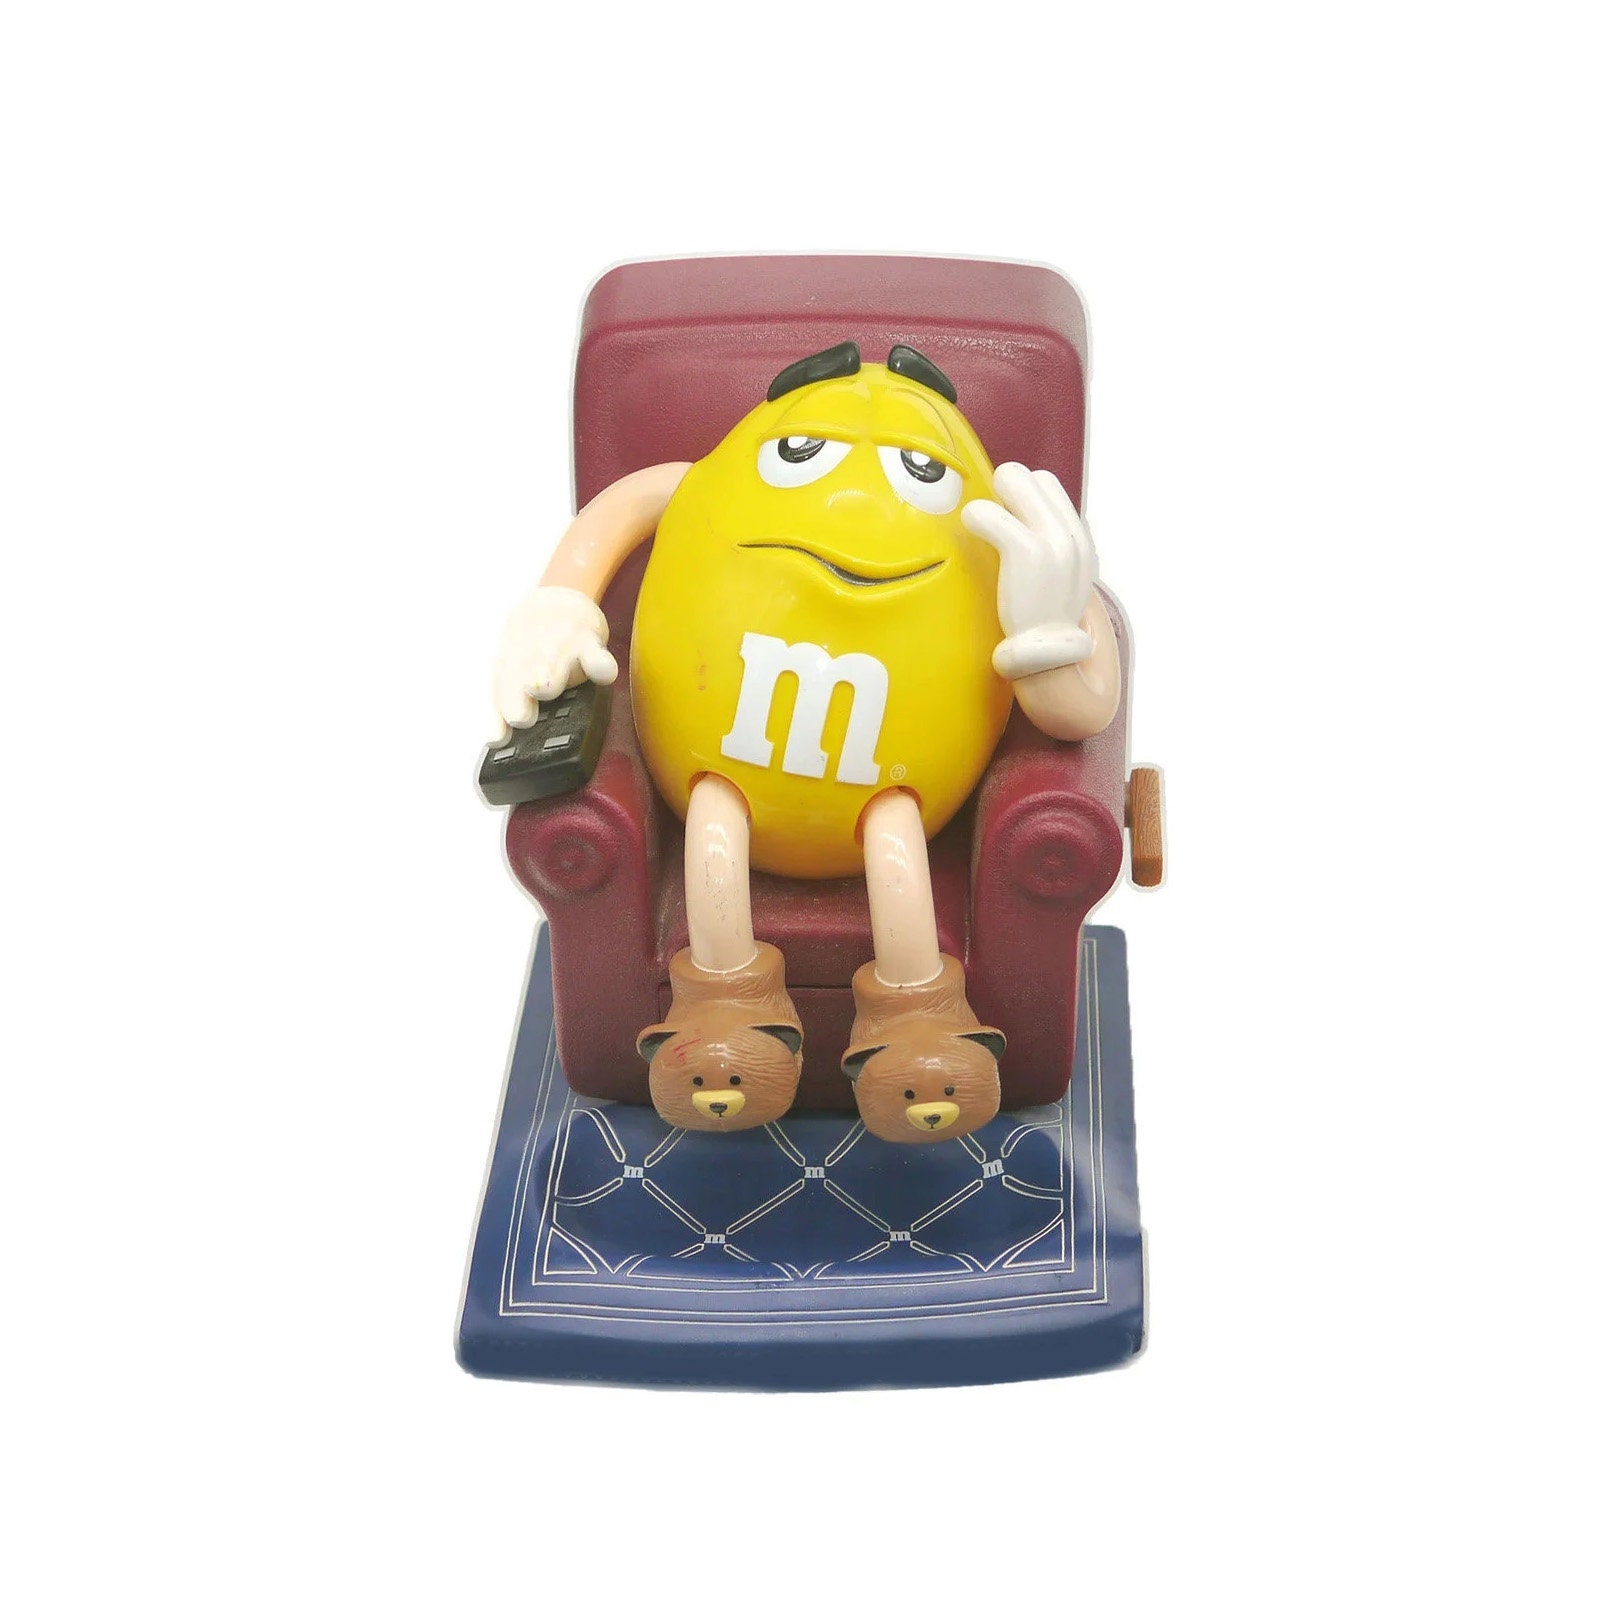 M&M's UK - To the one guy who messaged us asking what the